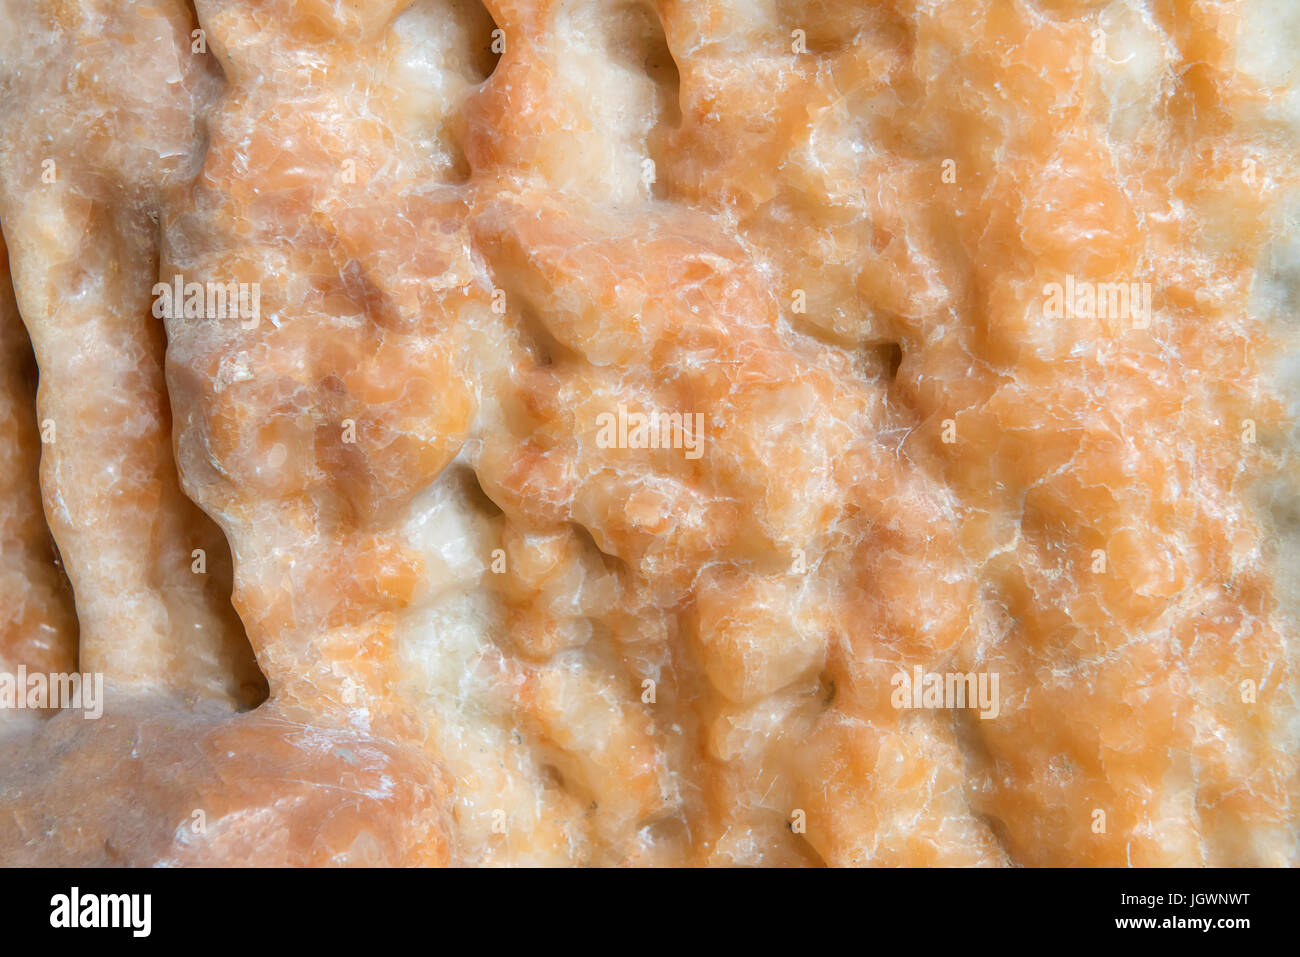 Texture stone of natural or stalactites abstract for design. Stock Photo